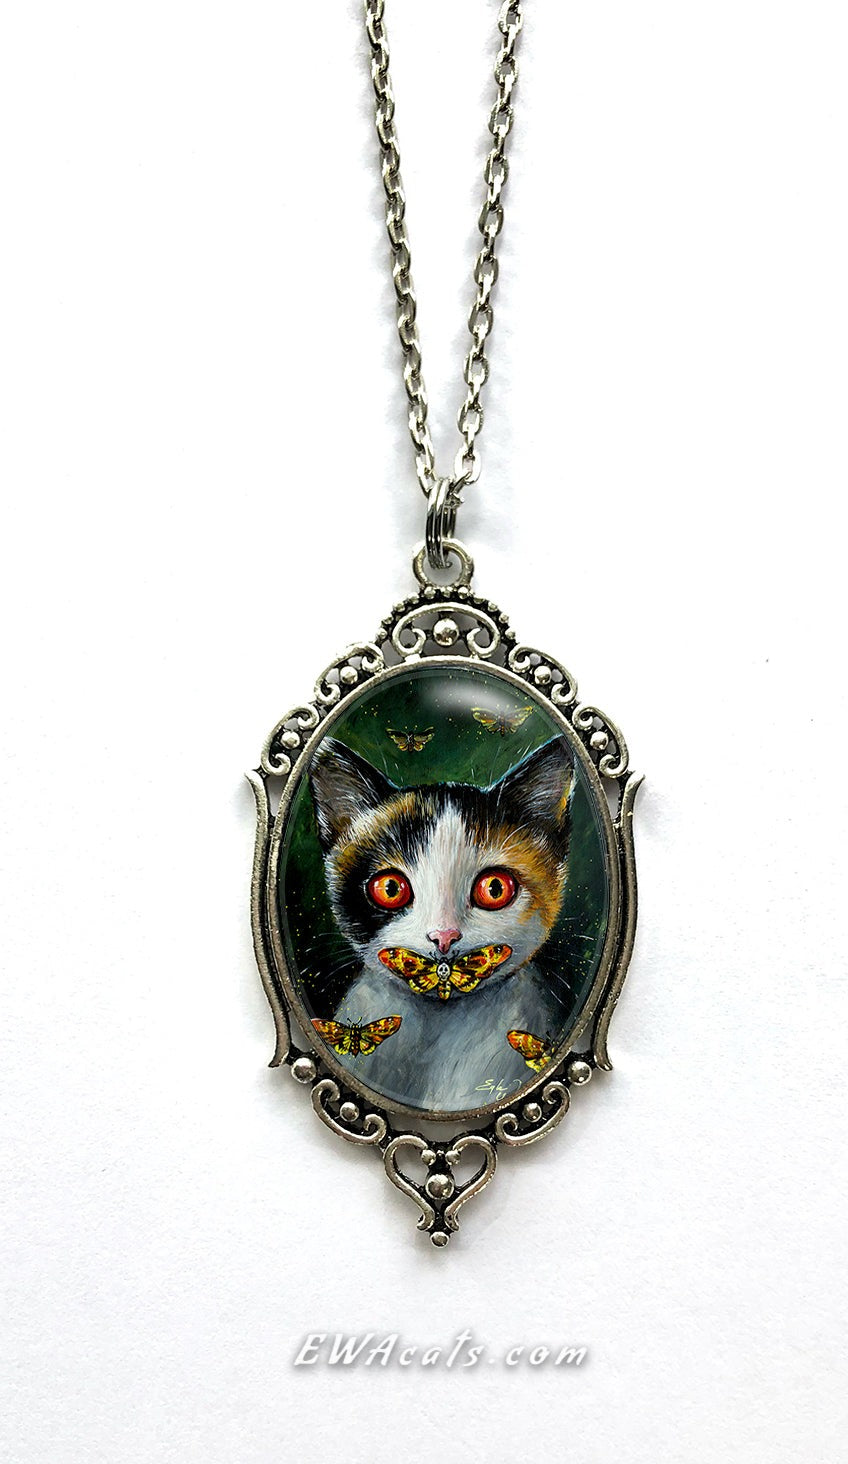 Necklace "Silence of the Cats"